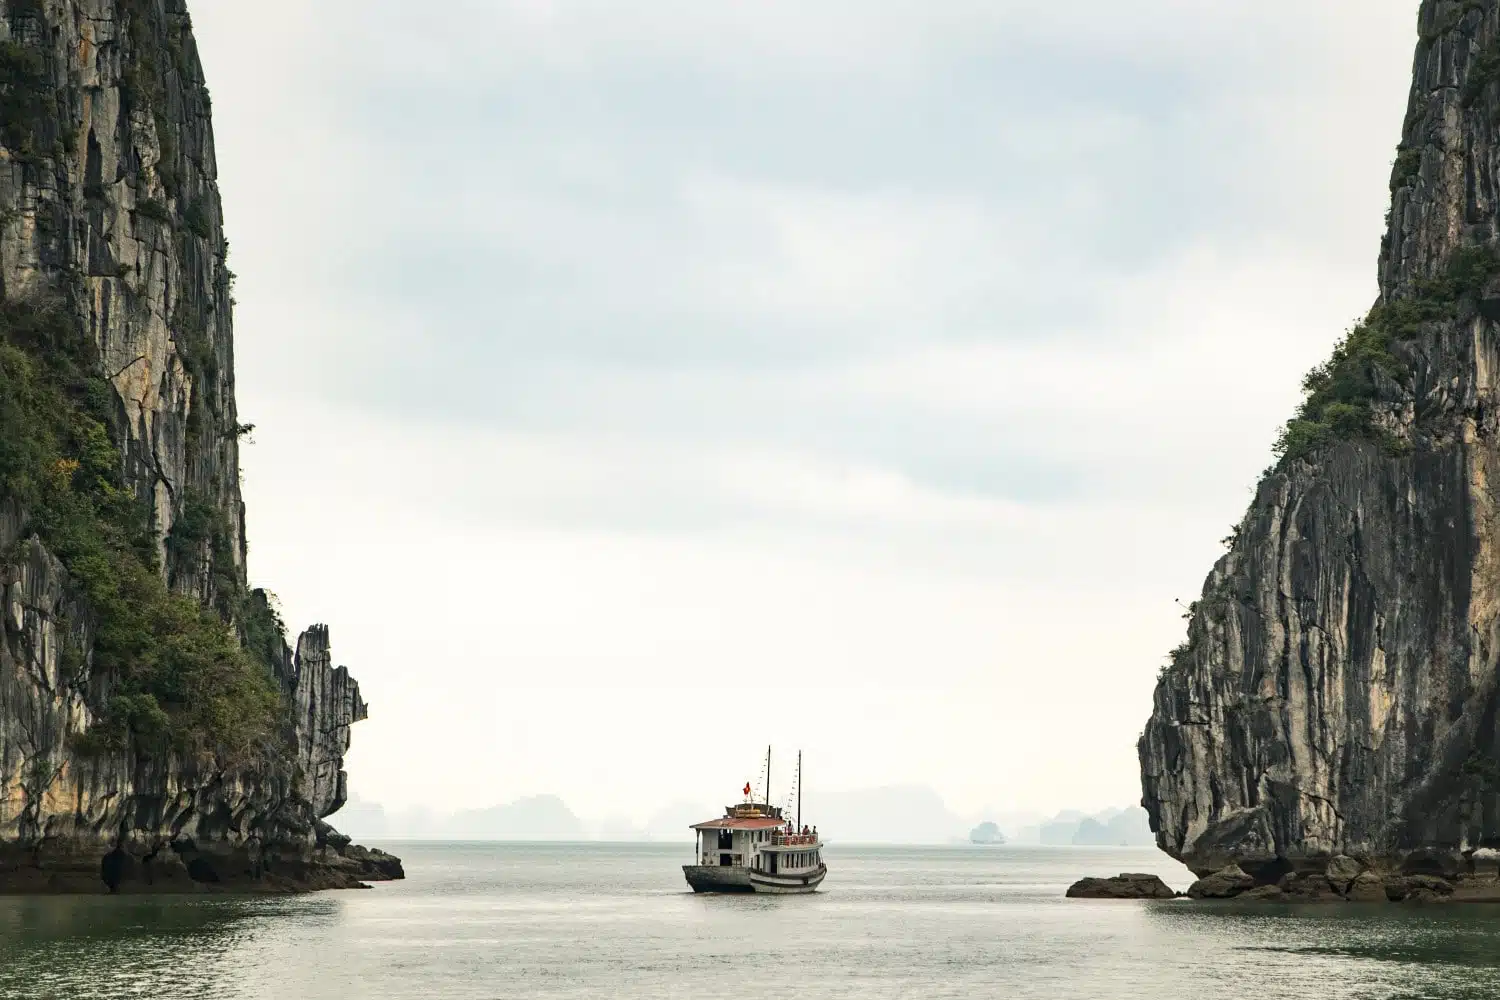 Ha Long Bay is one of the best places to visit in Vietnam. Photo by Ryan Waring on Unsplash